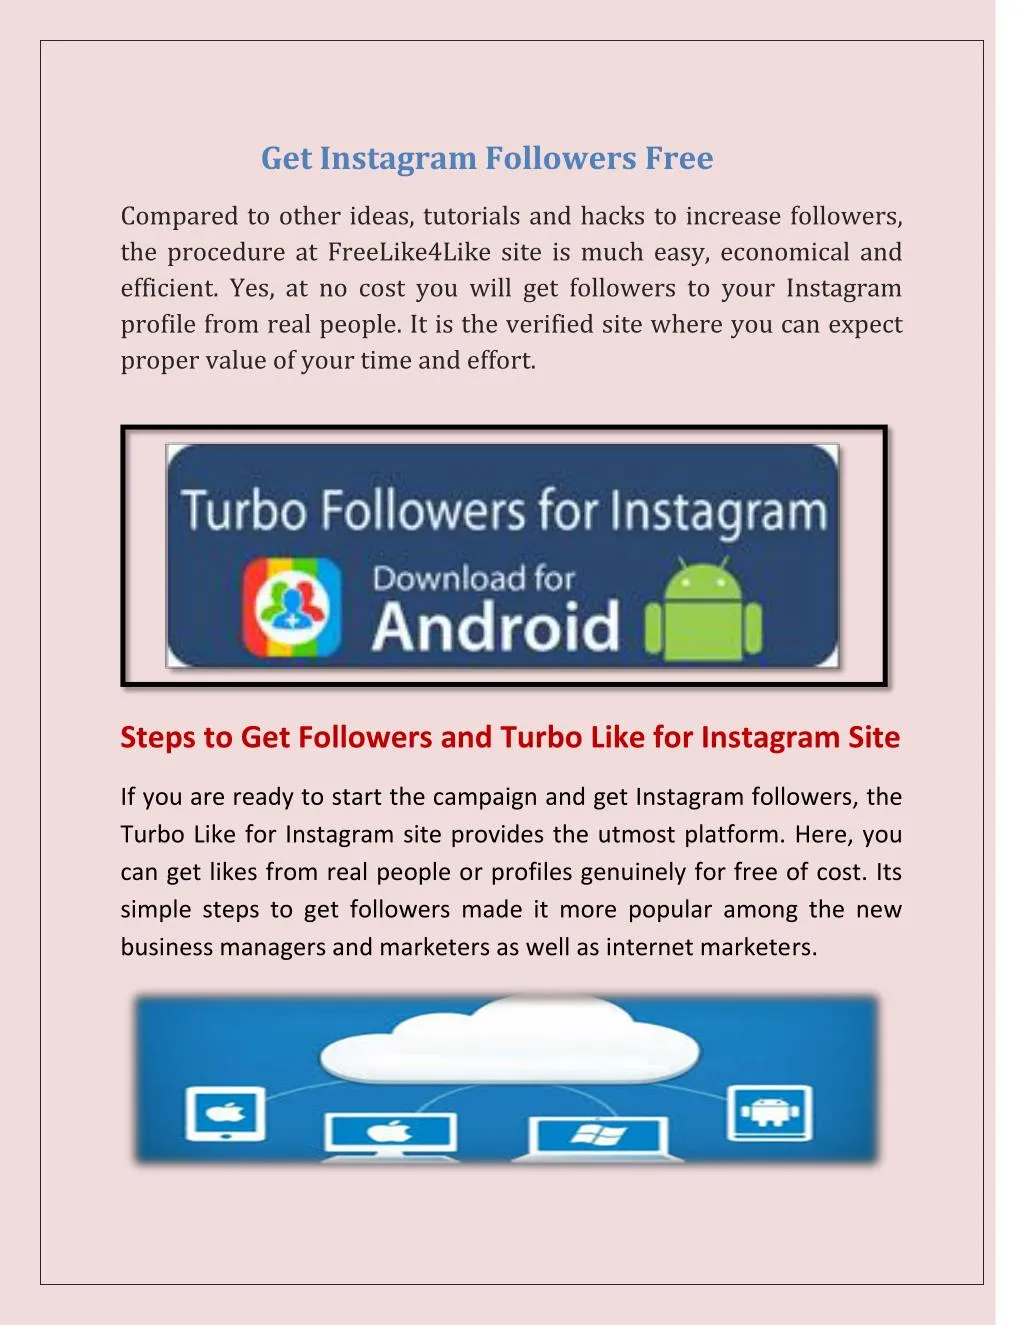 get instagram followers free - can you download your instagram followers